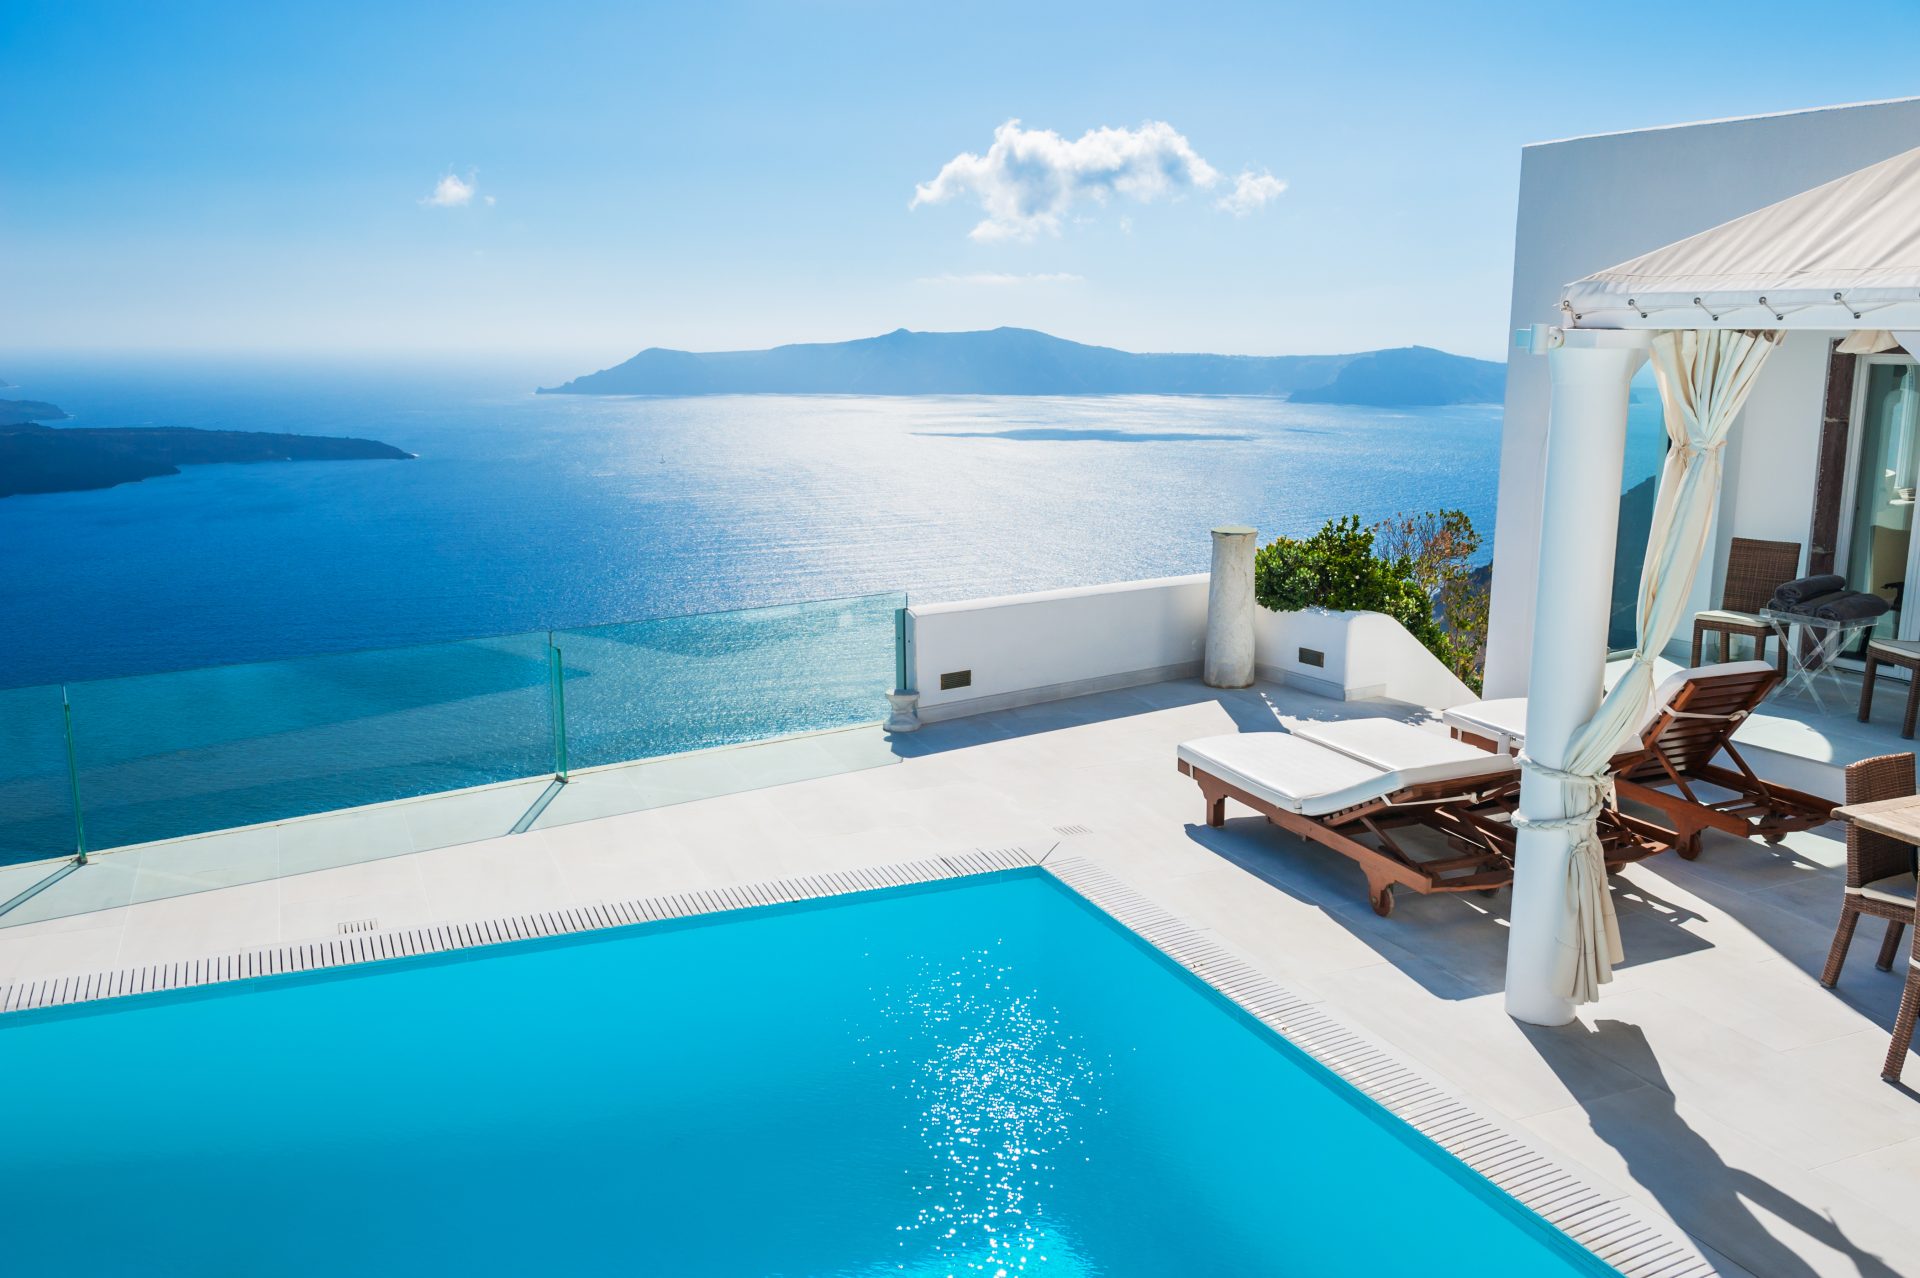 Image of a private pool, overlooking the ocean on a resort.